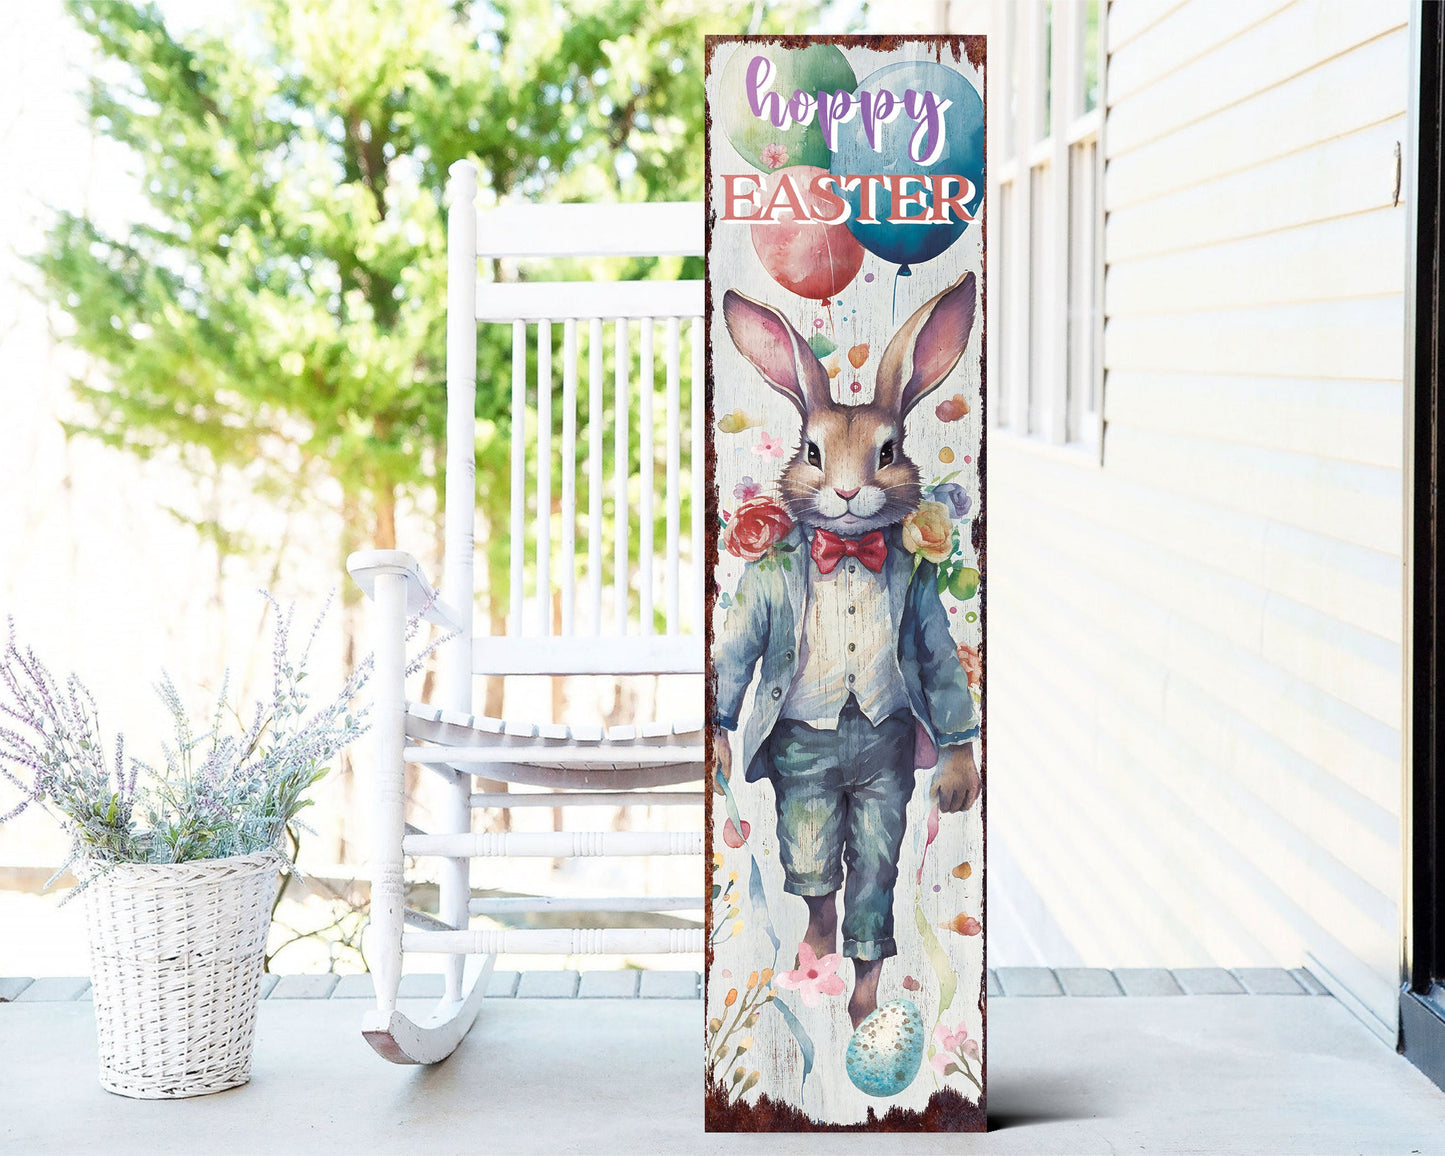 36in Rustic Modern Farmhouse 'Hoppy Easter' Sign for Front Porch | Easter Outdoor Decor for Front Door